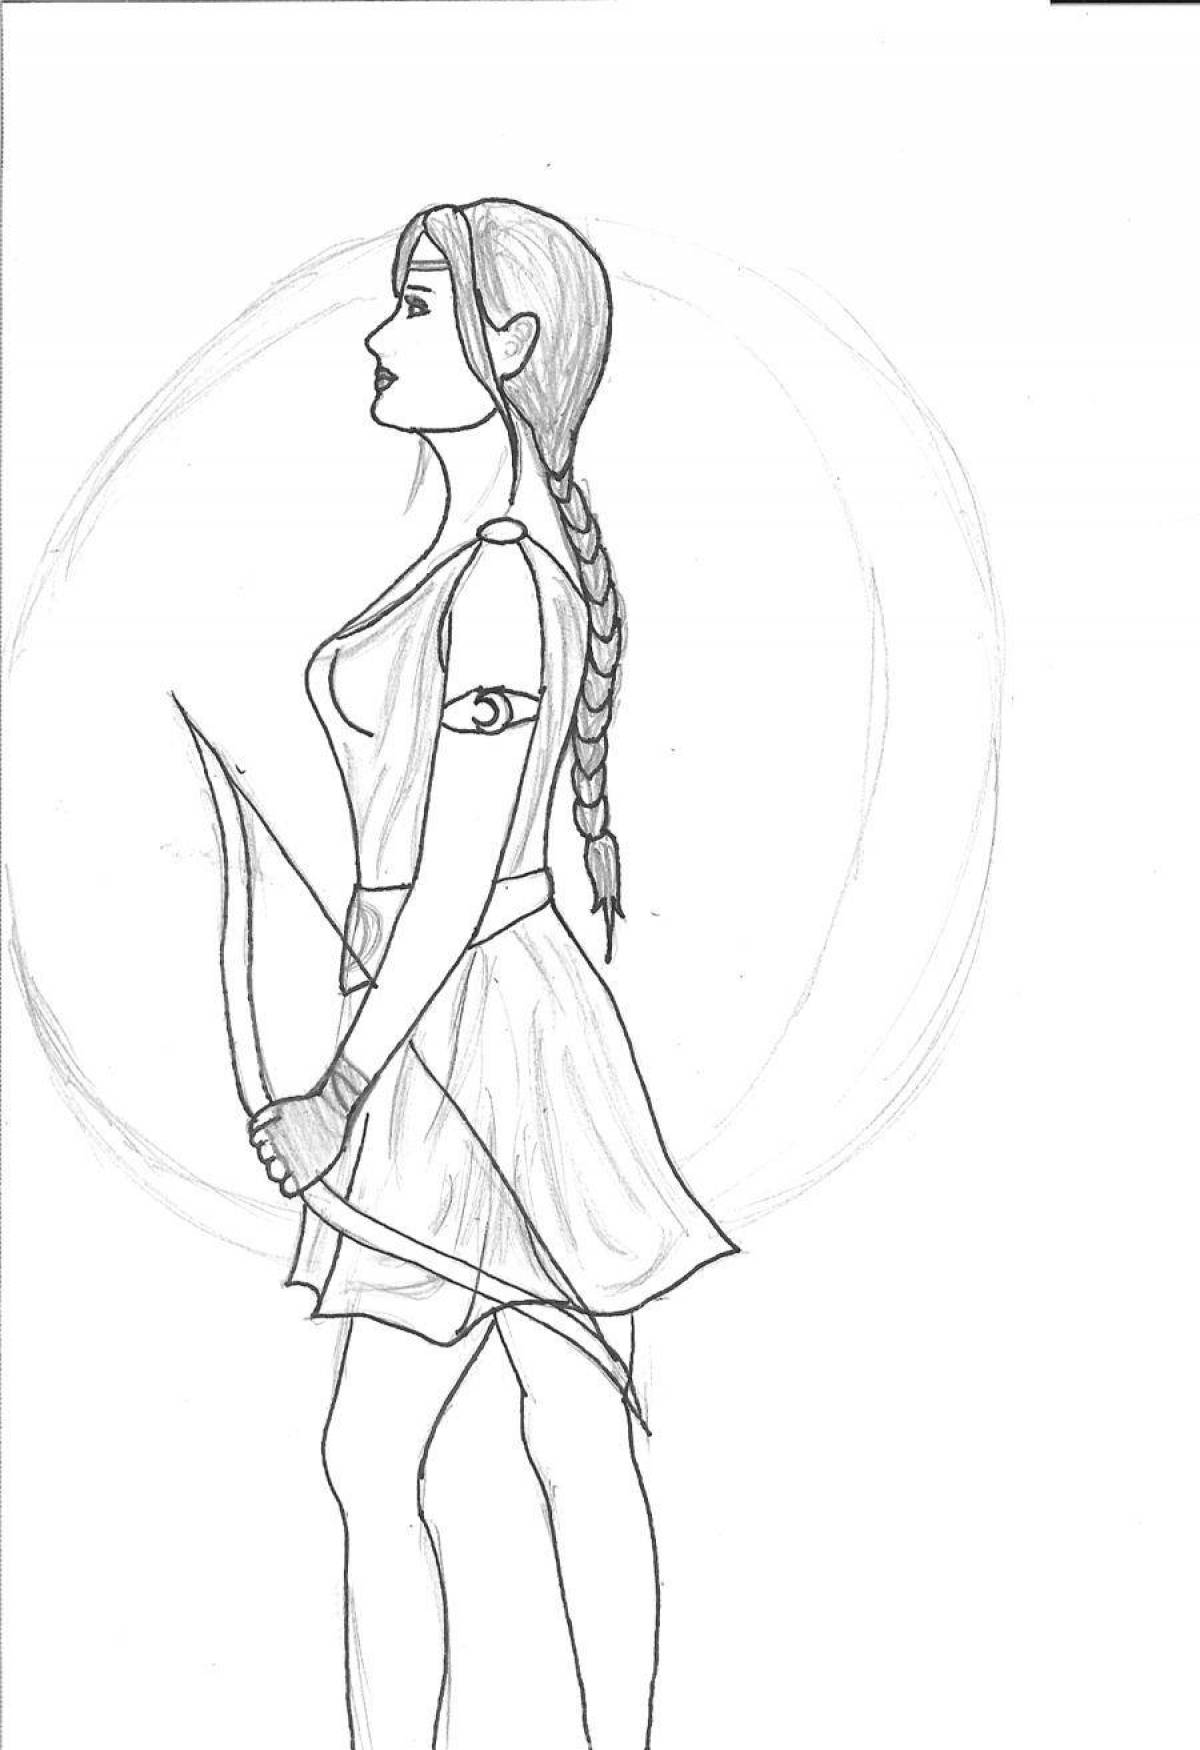 Deluxe coloring of the goddess Artemis